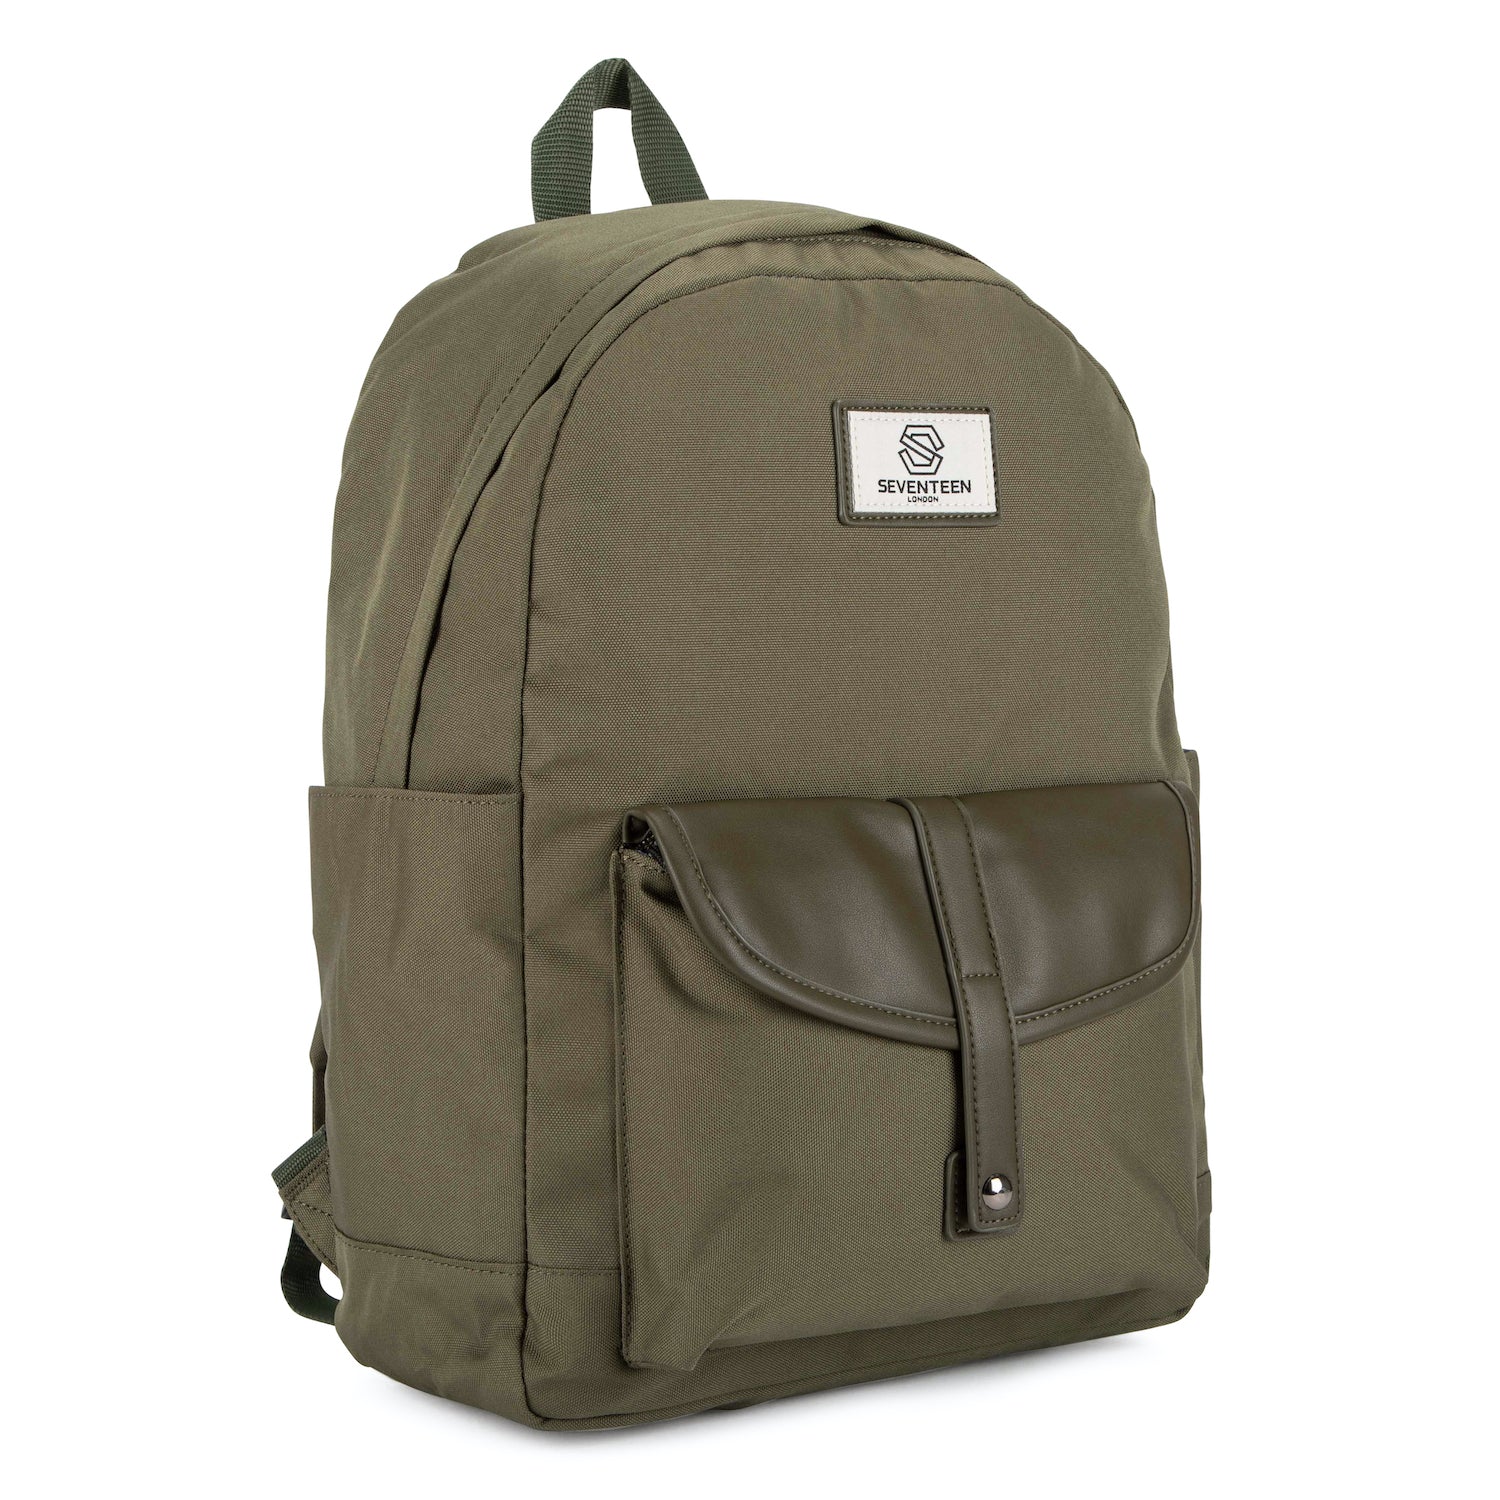 Notting Hill Backpack - Army Green - Seventeen London